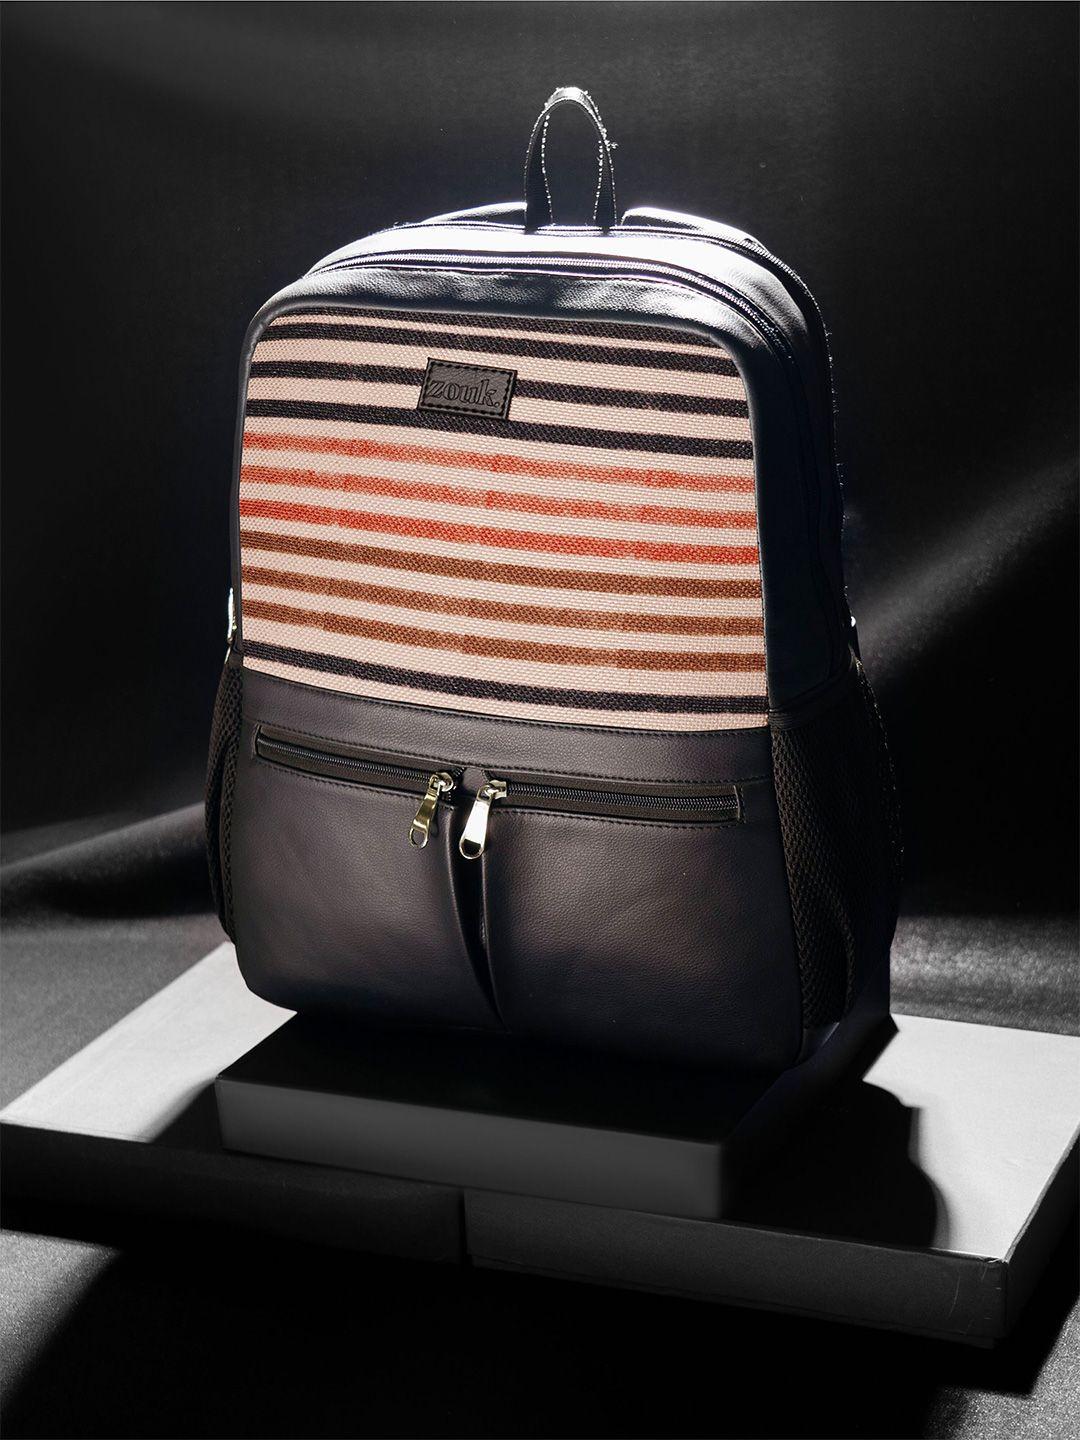 zouk striped backpack with compression straps up to 16 inch